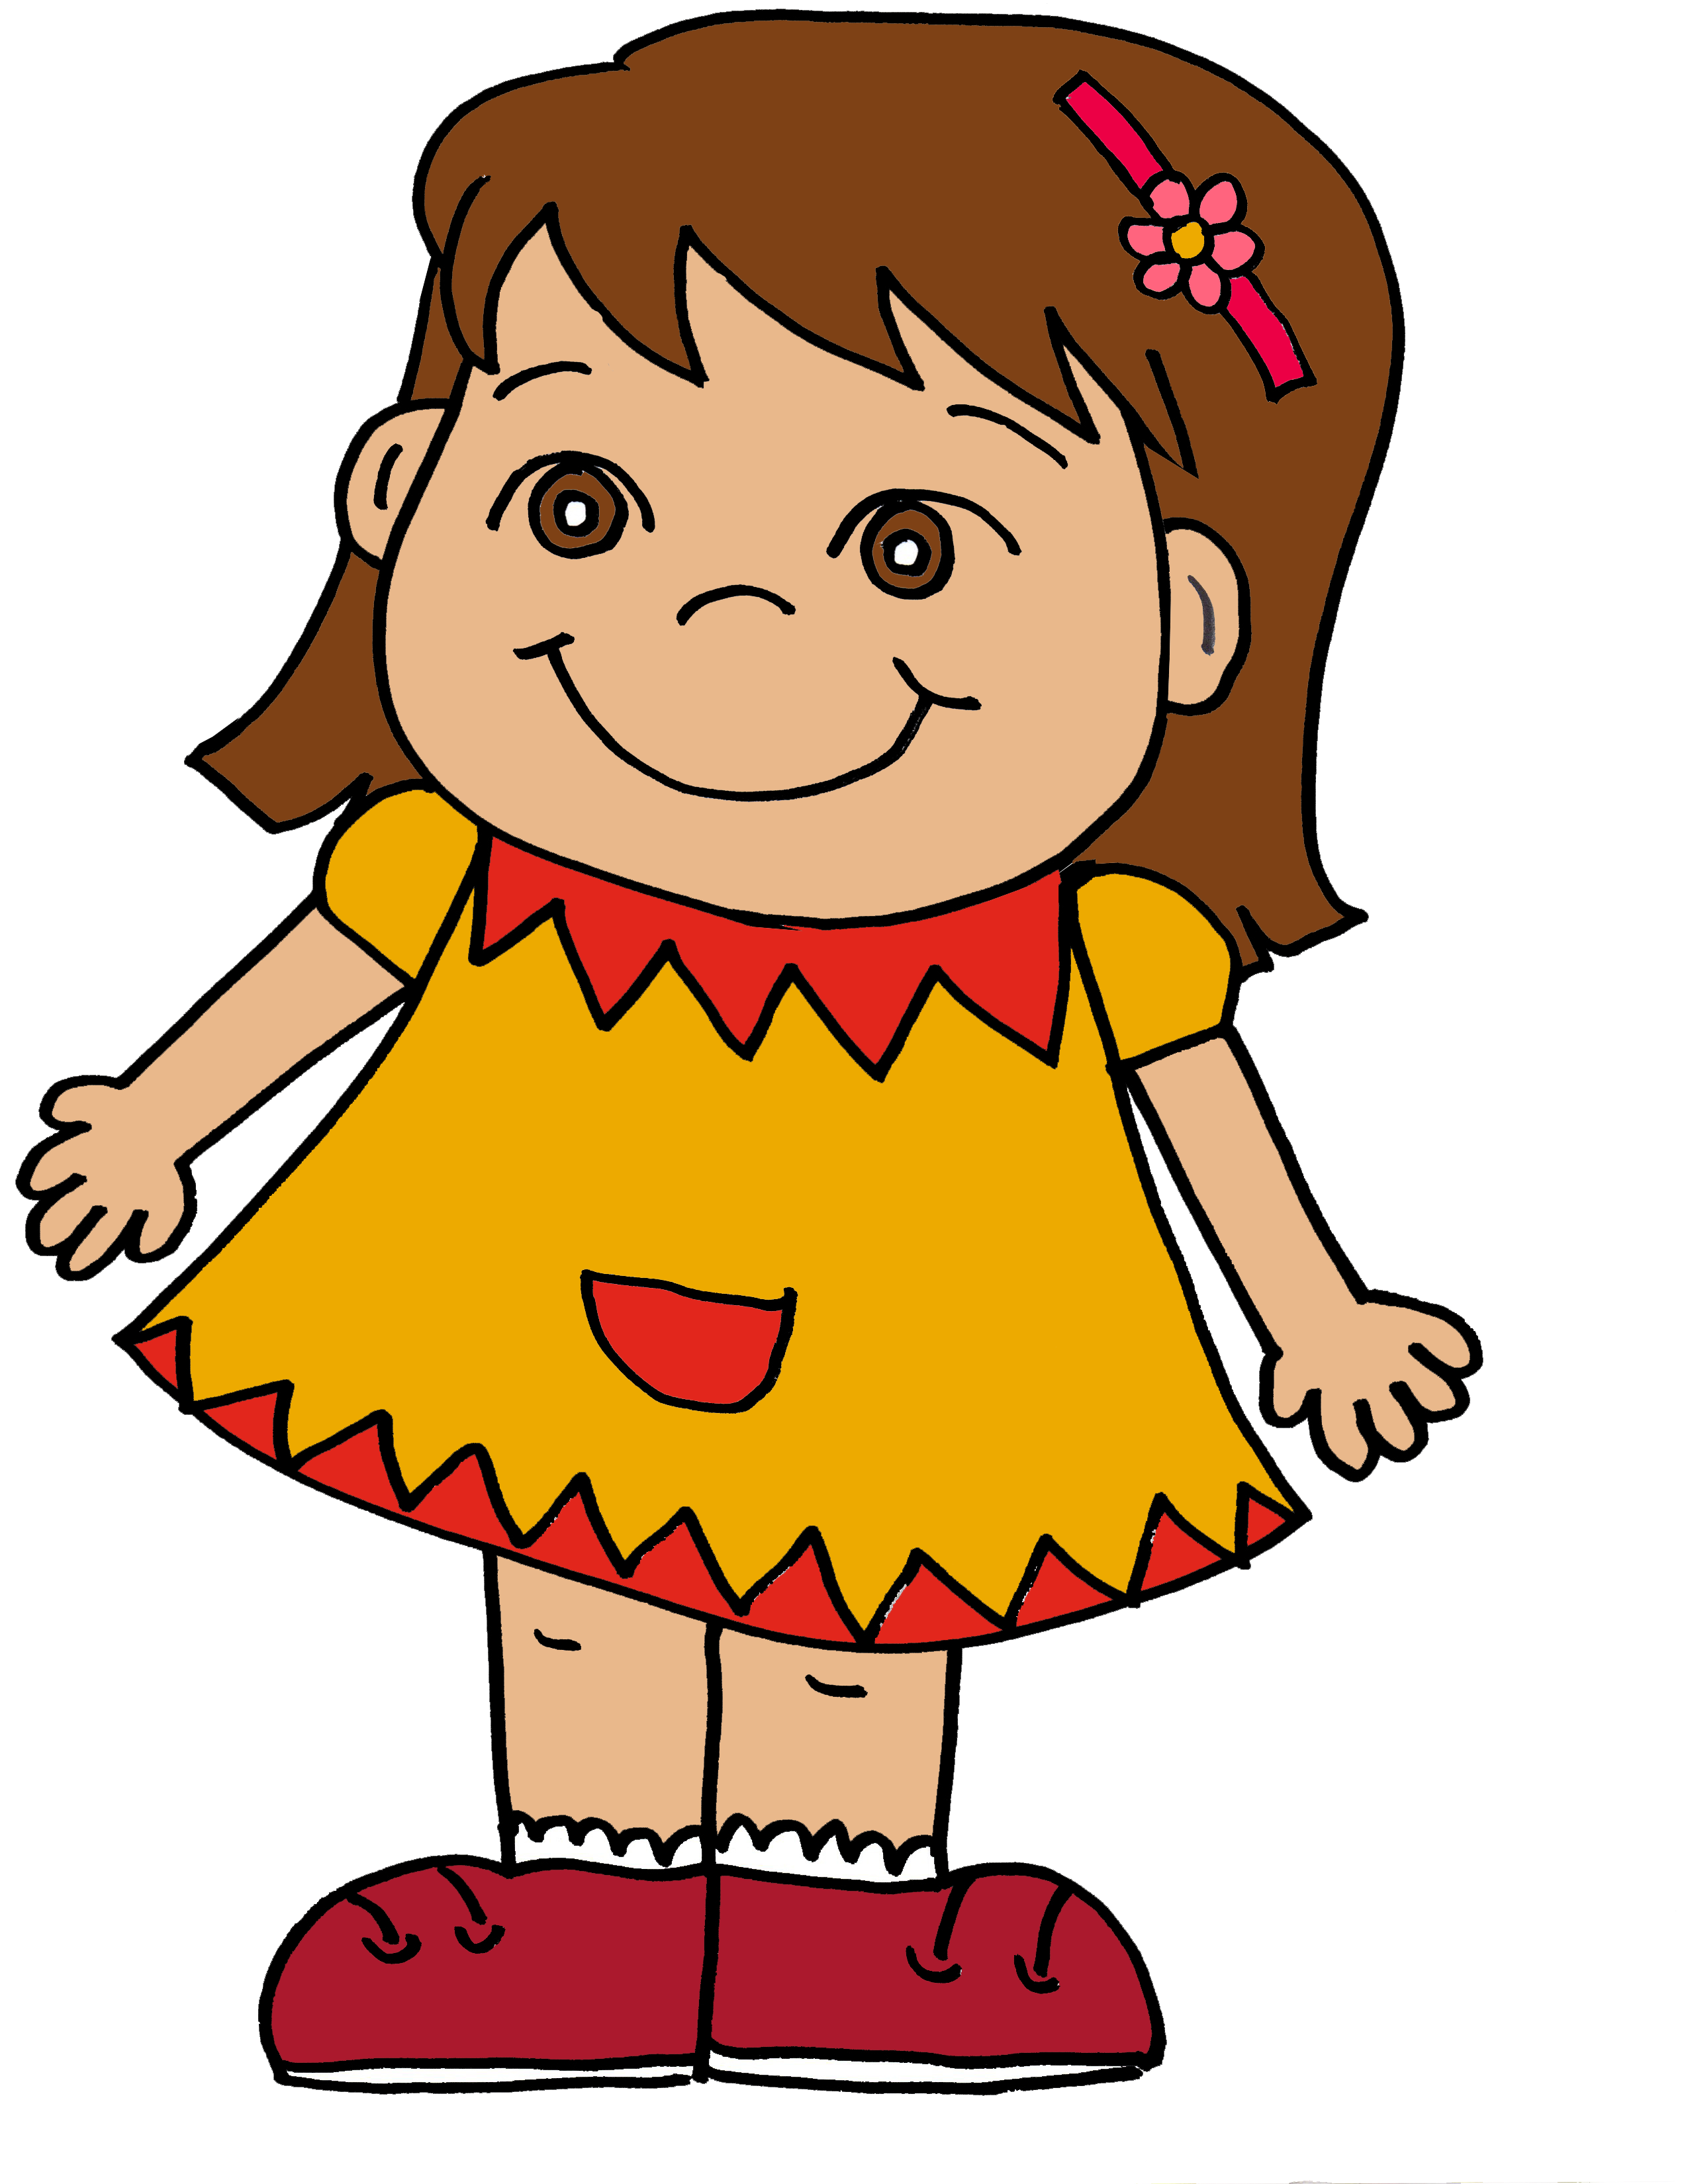 Aunt panda free images. Wagon clipart baby